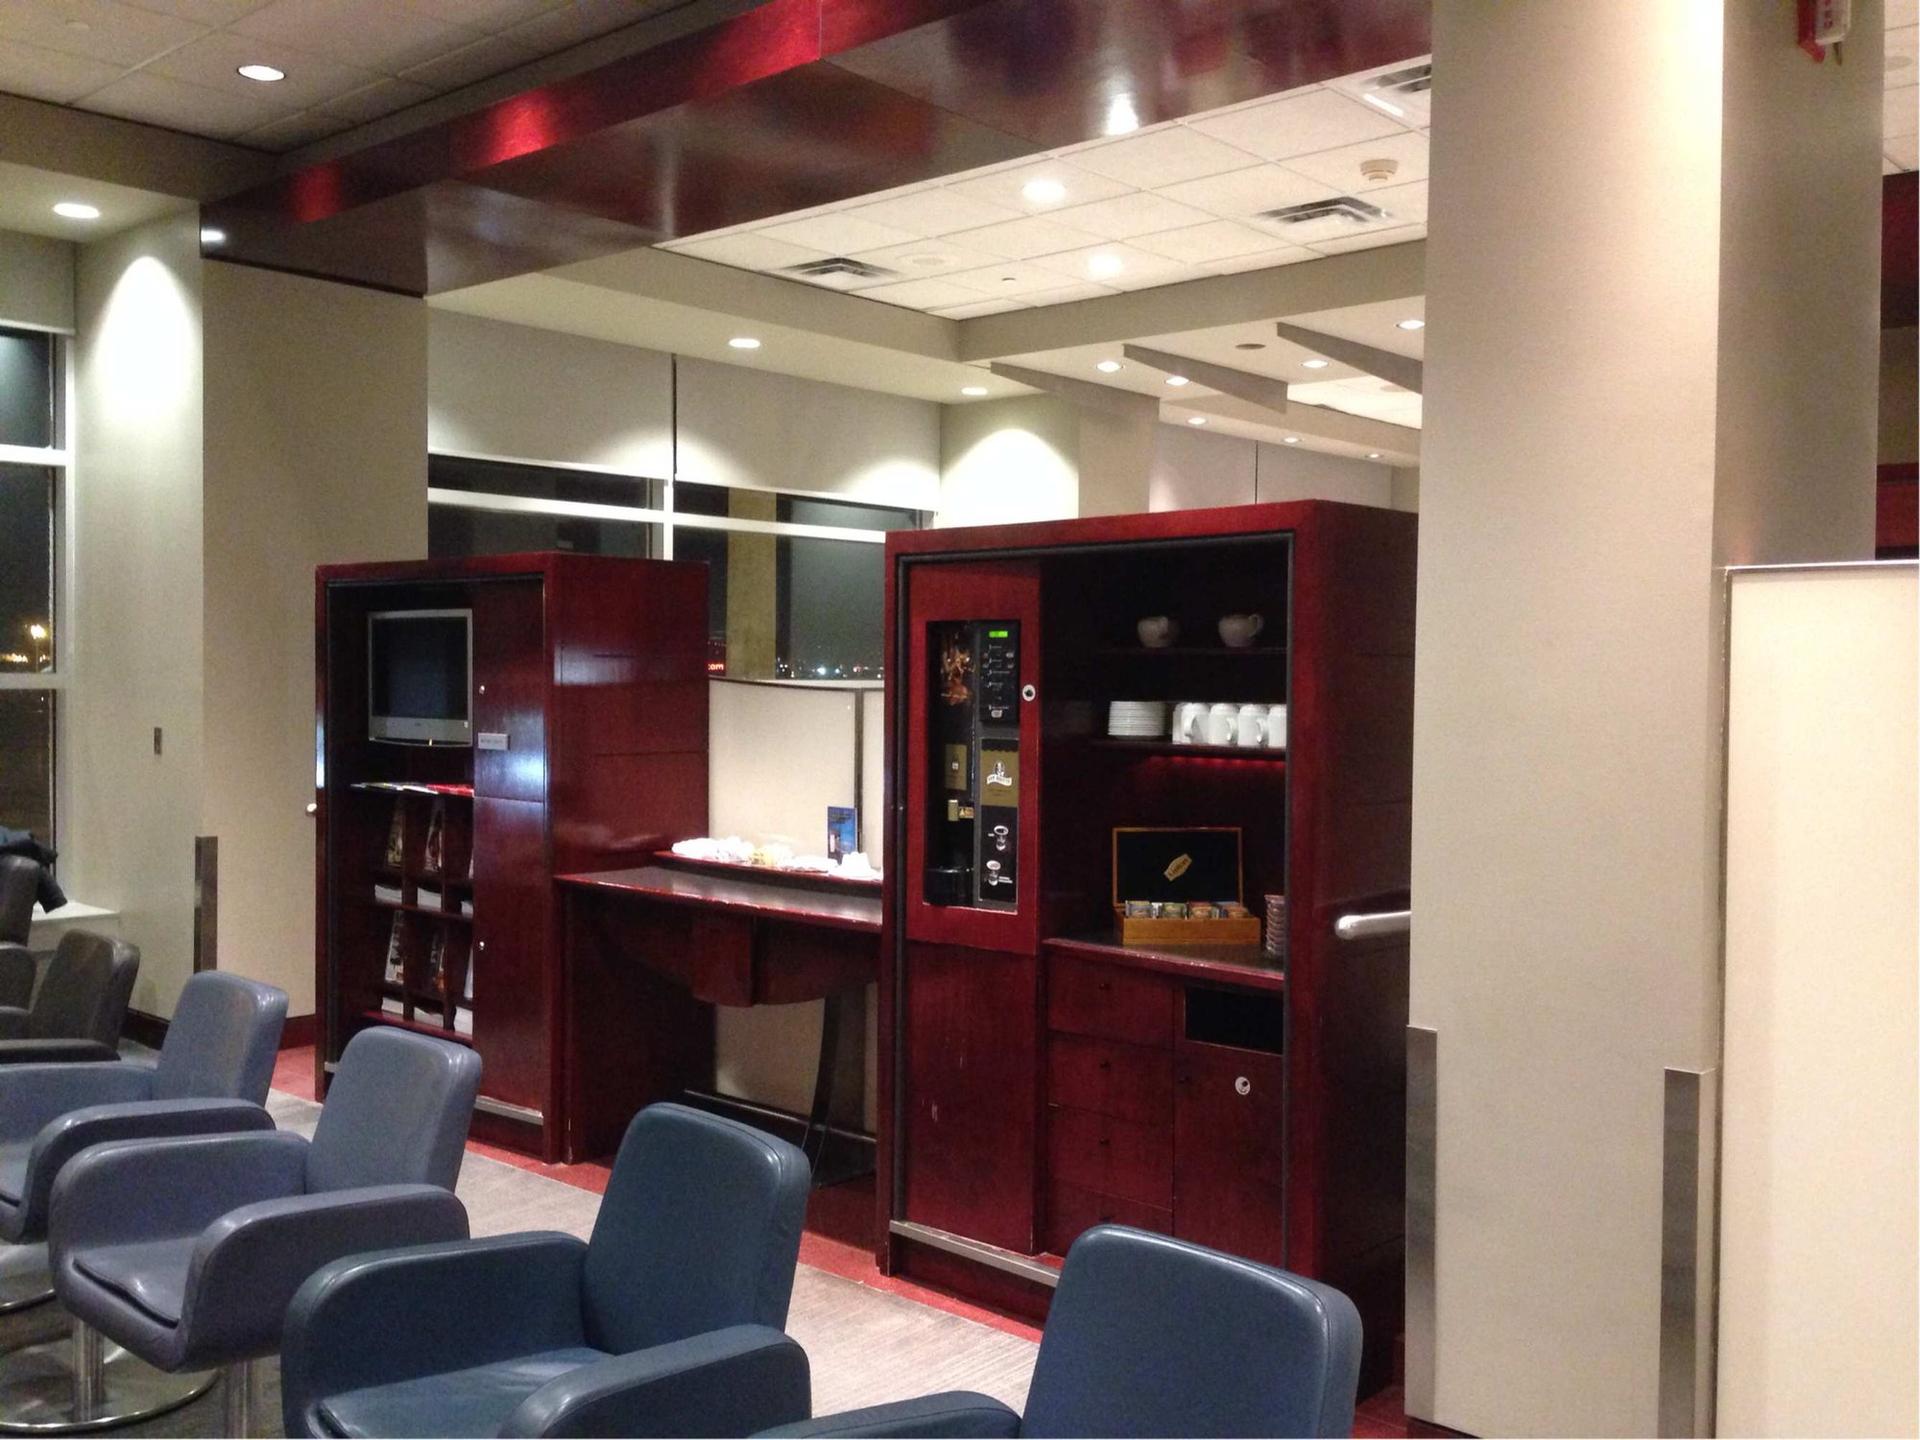 Air Canada Maple Leaf Lounge image 1 of 7